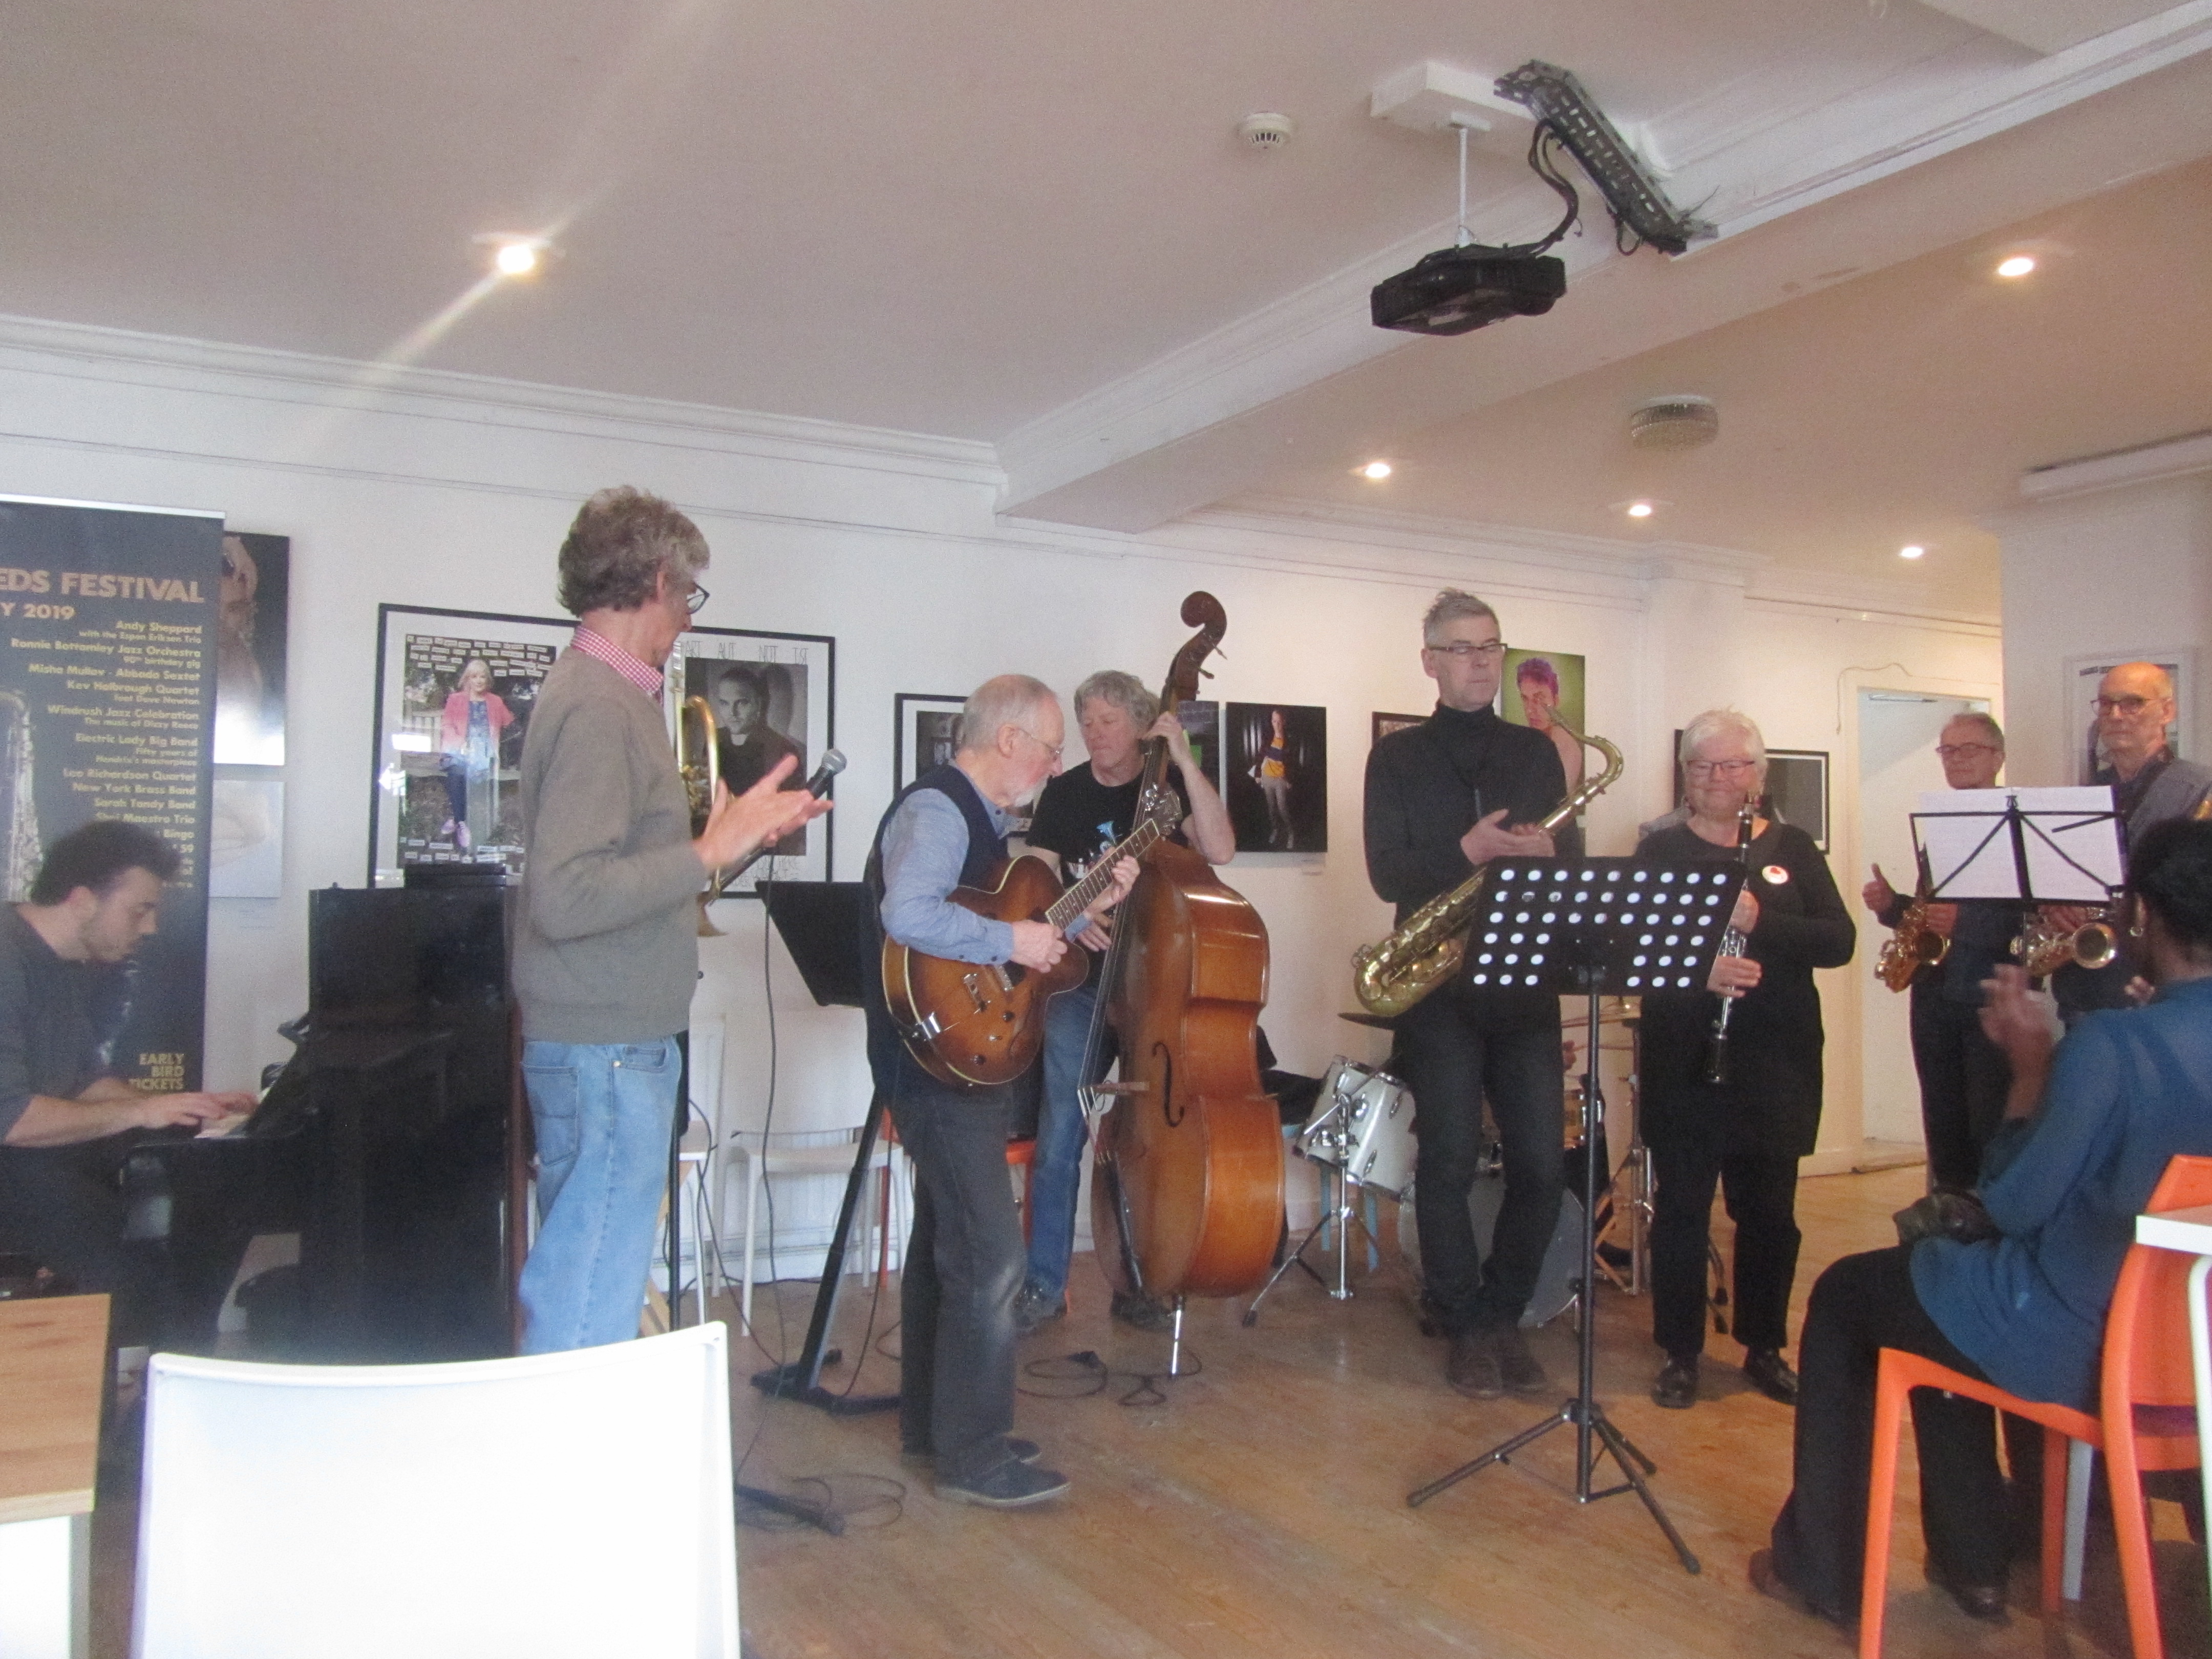 Local to Leeds? then grab your horn, dust off your vocal chords or just watch the fun at our friendly jazz jam session at Northlight!